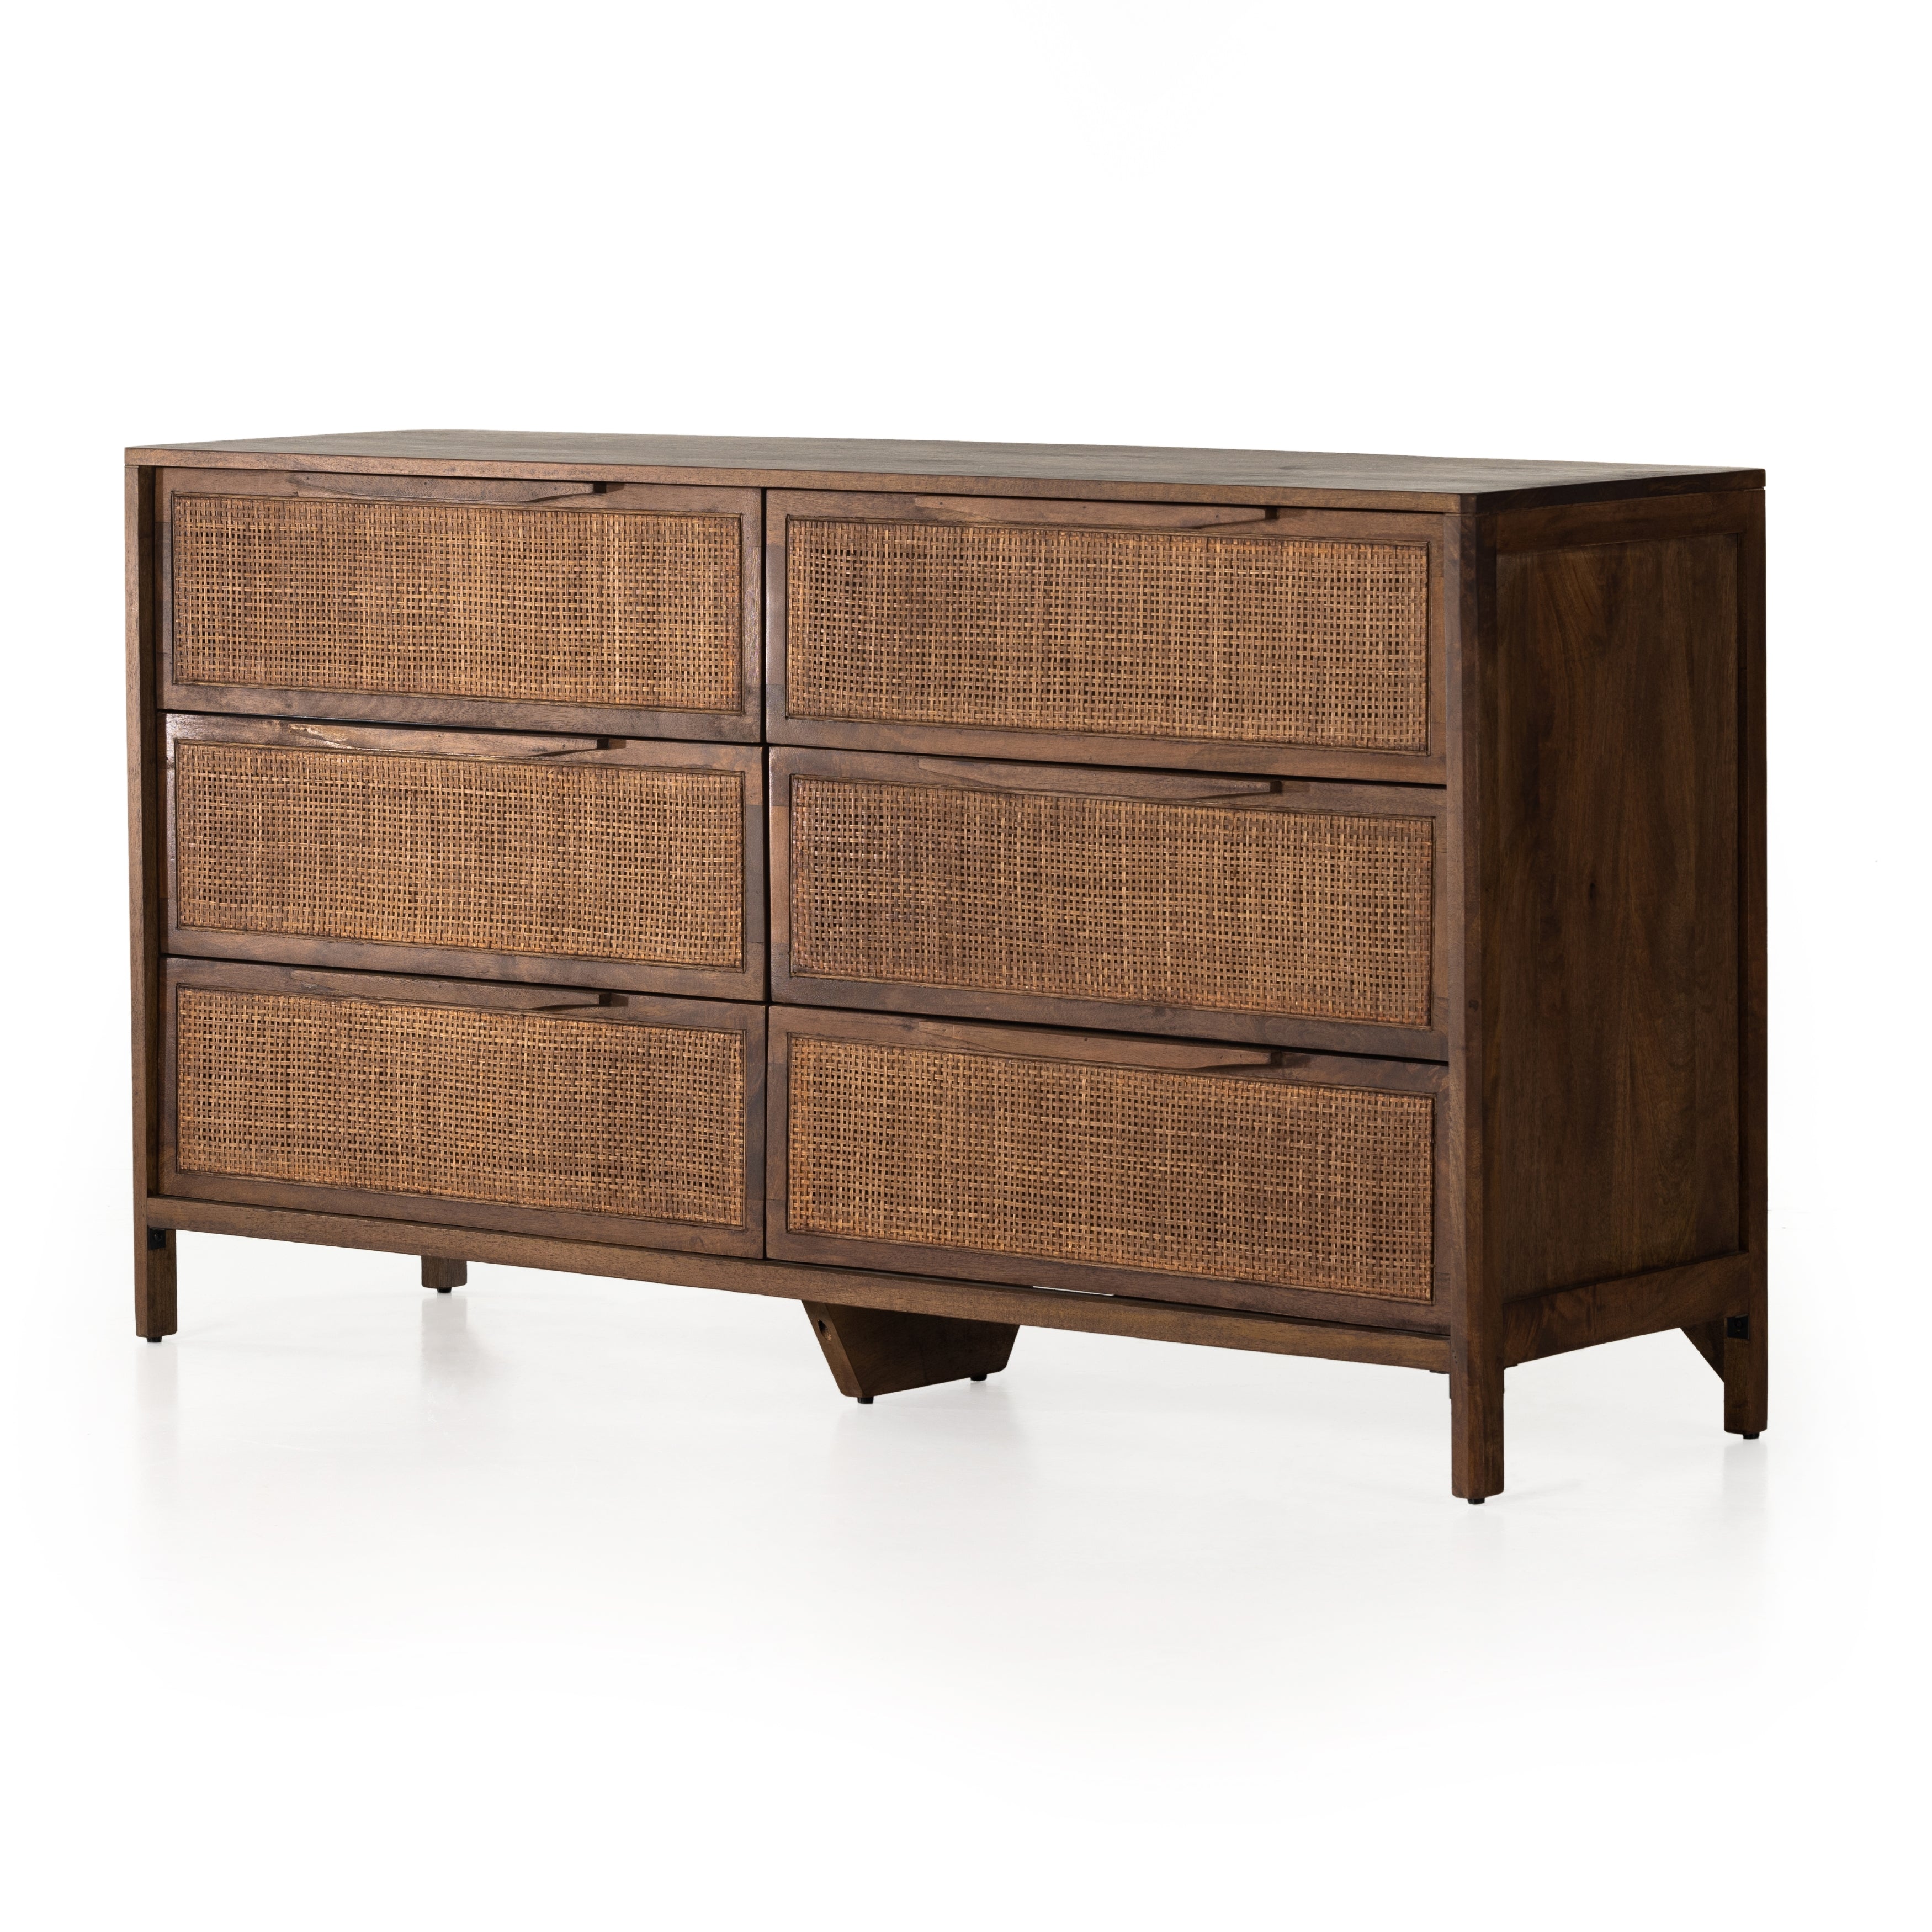 Sydney Brown Wash Drawer Dresser encases six spacious drawers of woven cane, for a textural look with monochromatic vibes. Amethyst Home provides interior design services, furniture, rugs, and lighting in the Los Angeles metro area.